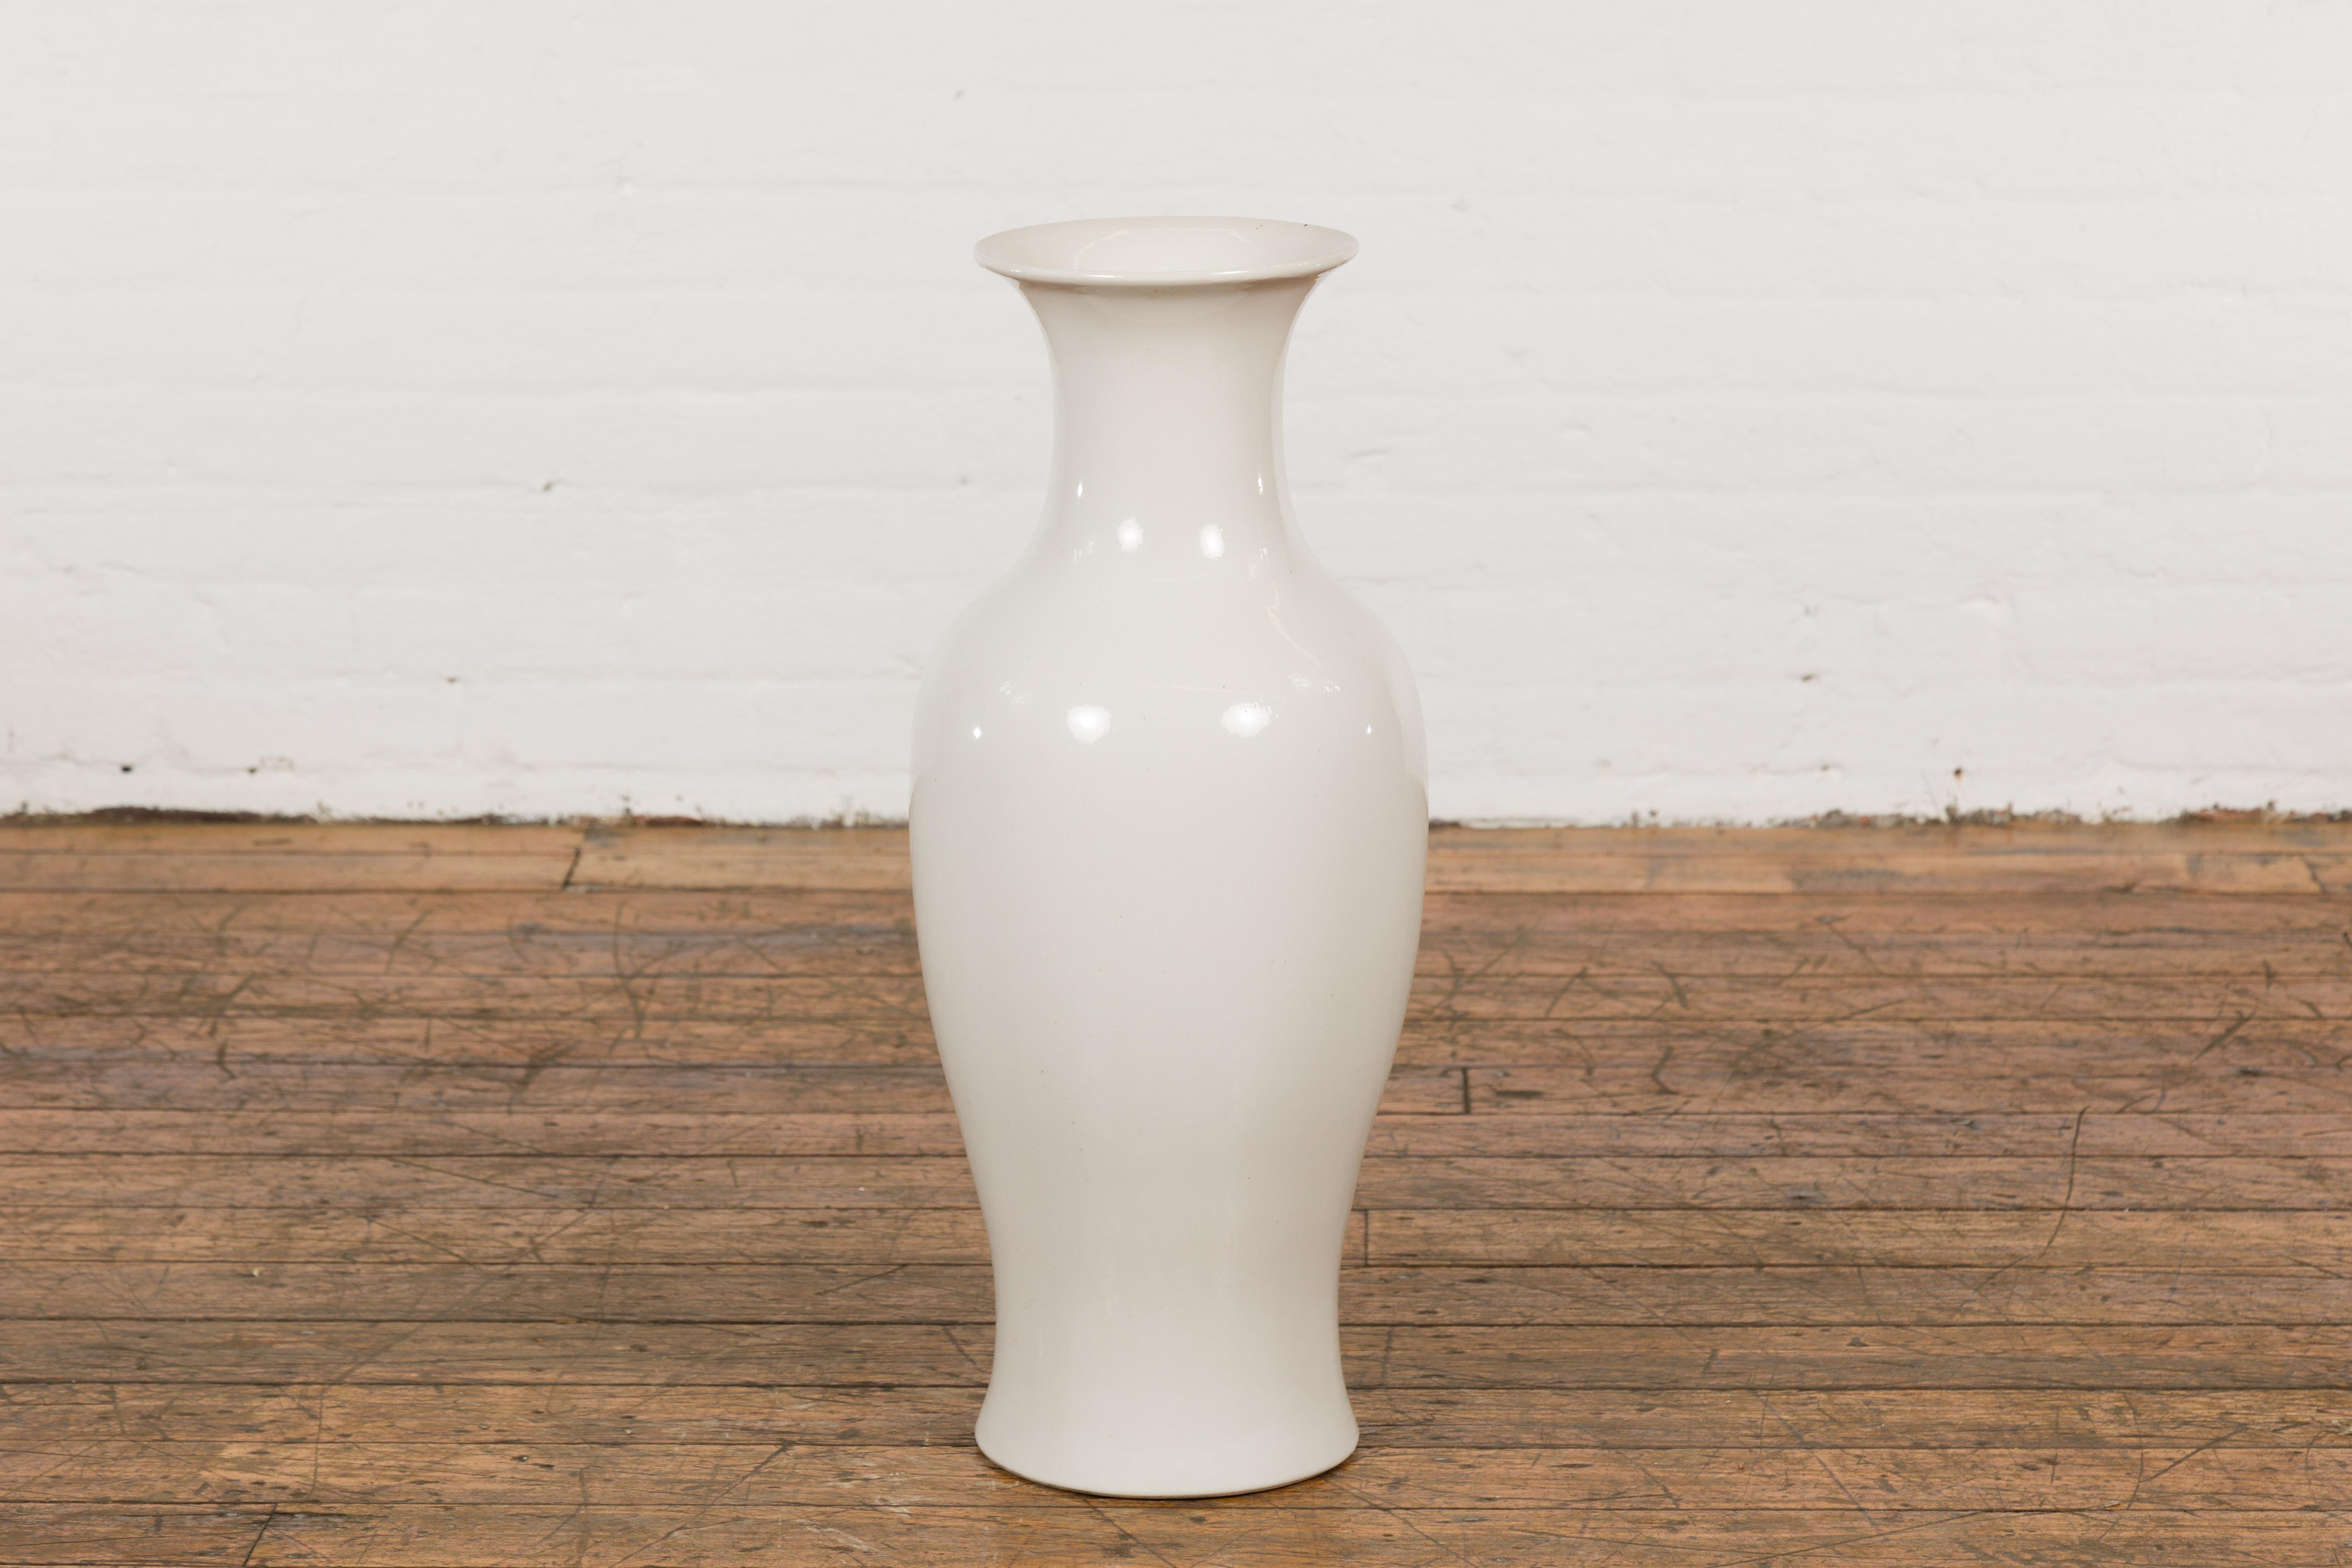 A Chinese vintage blanc de Chine altar vase from the mid 20th century, with flaring neck. Experience the timeless elegance of traditional Chinese craftsmanship with this vintage mid-20th century Blanc de Chine altar vase, featuring an artfully